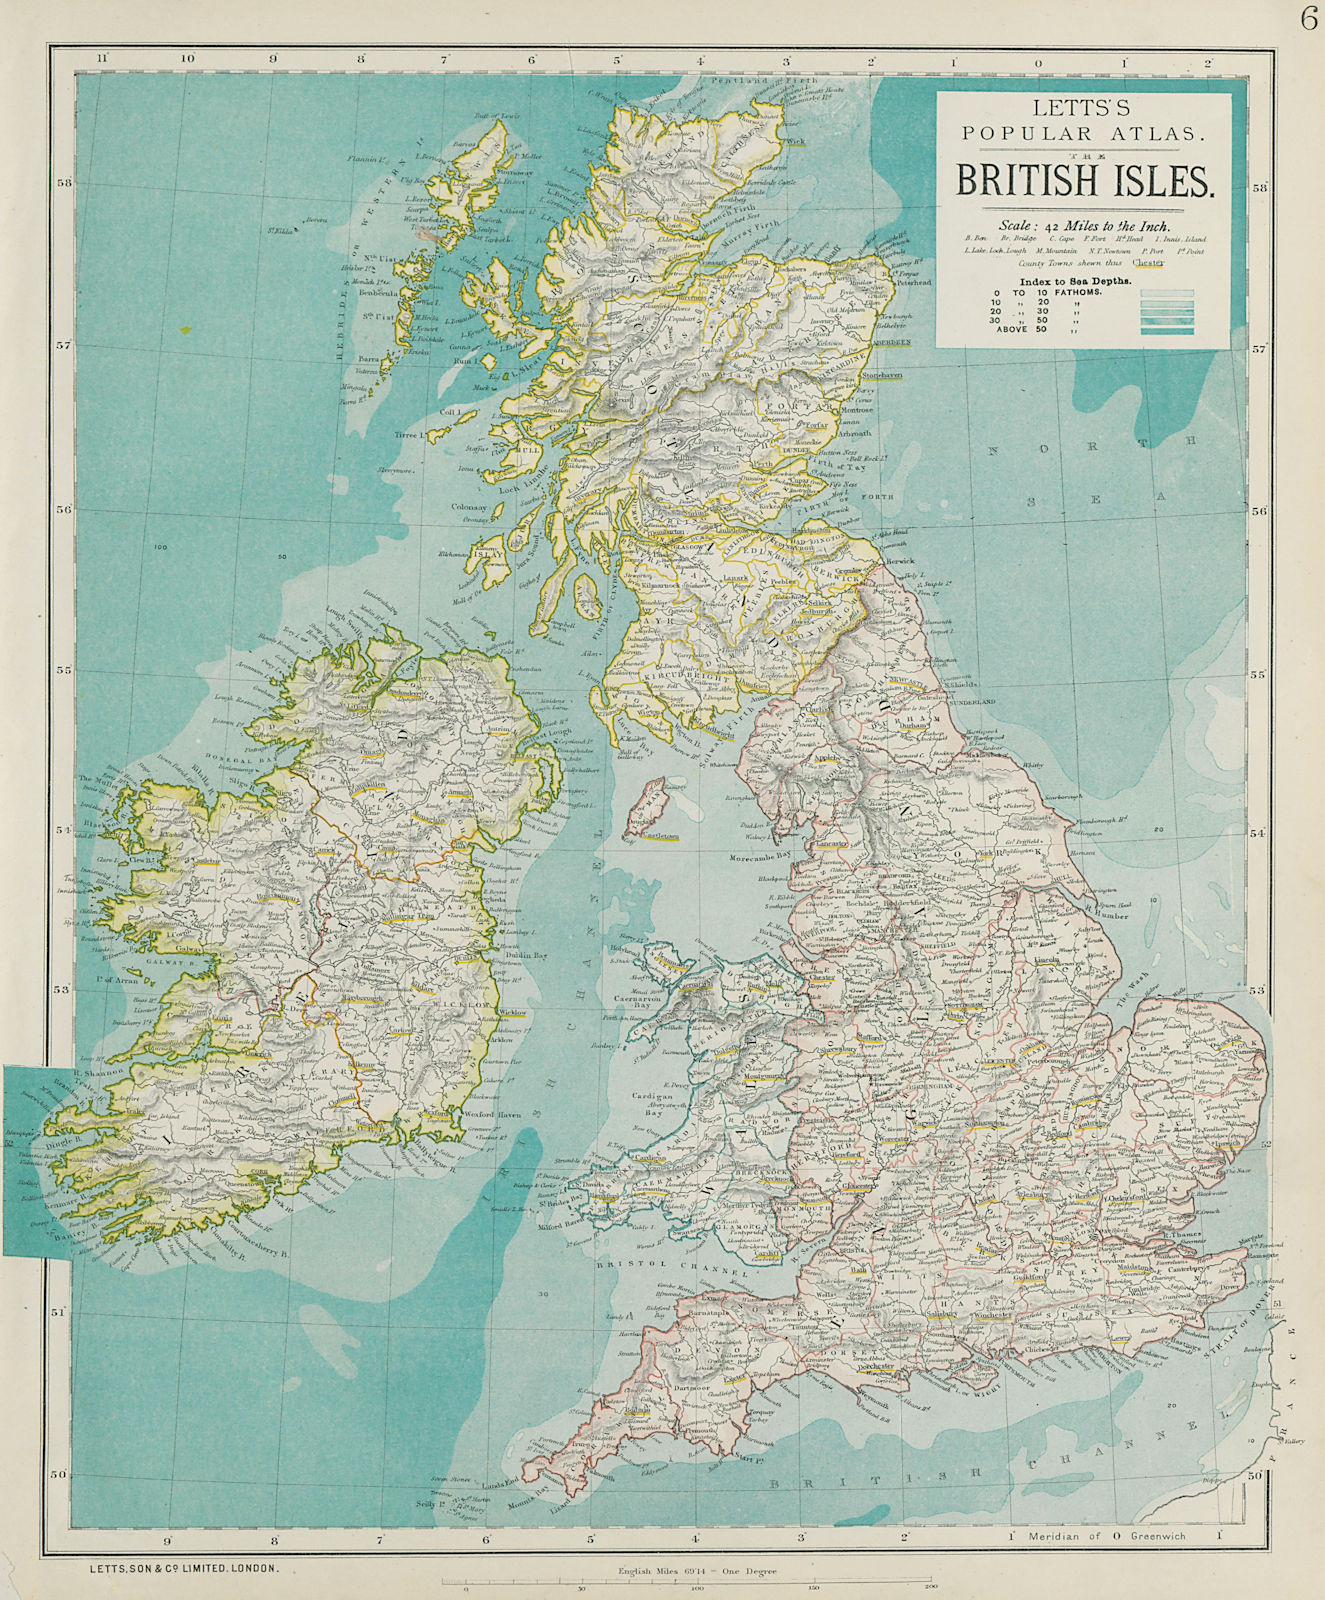 Associate Product BRITISH ISLES. United Kingdom. Ireland. Counties towns rivers. LETTS 1884 map